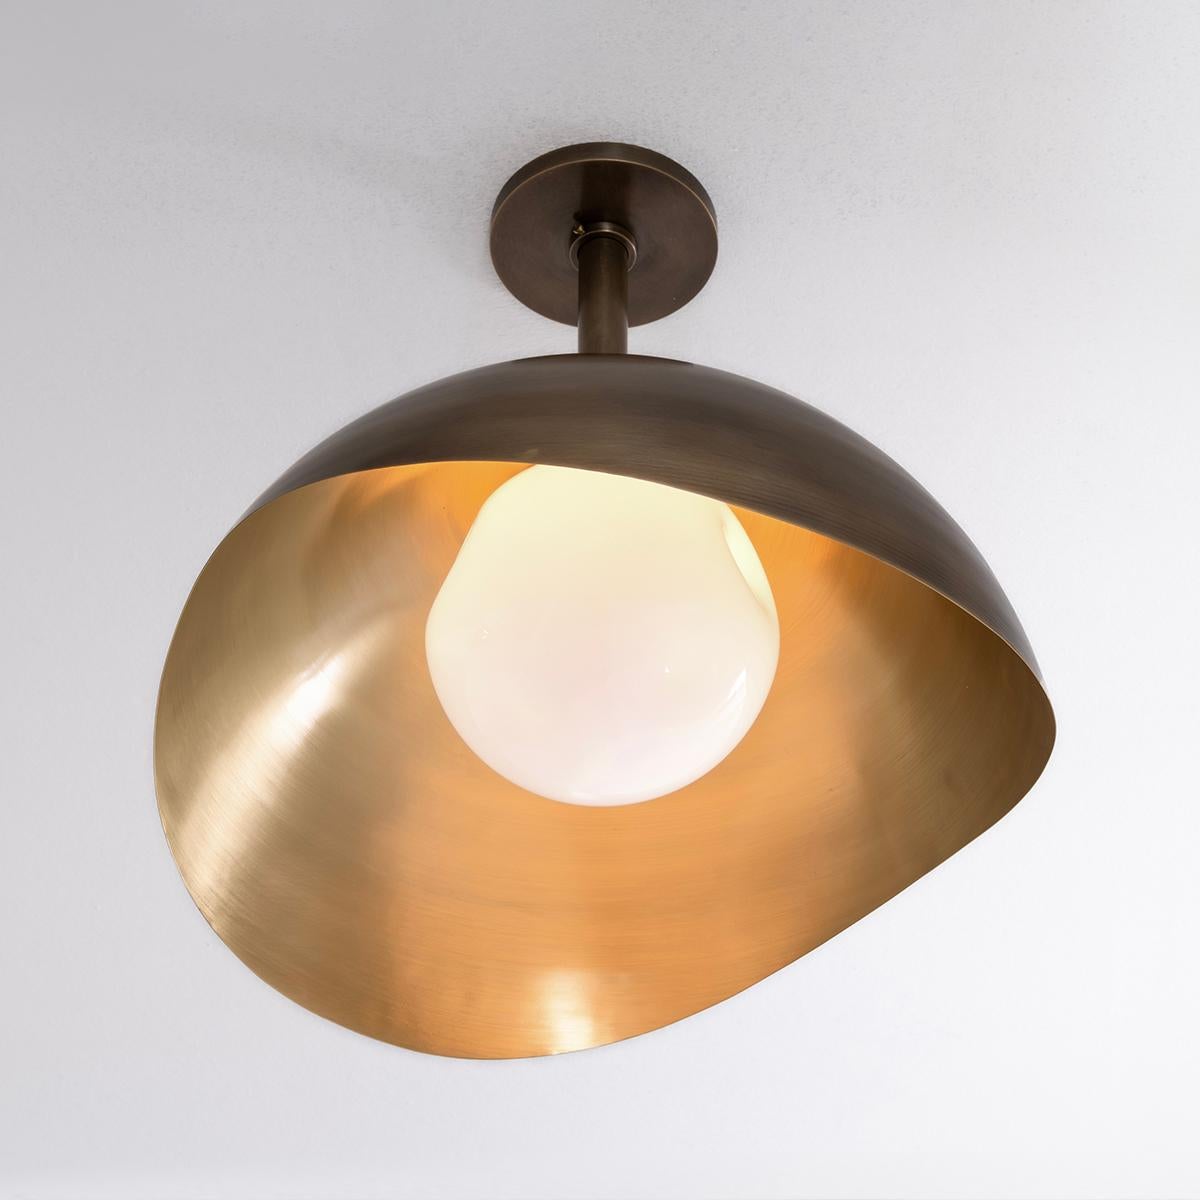 The Perla Grande features an organic brass shell nestling our sfera glass handblown in Murano. Shown in a two tone finish with a bronzo nuvolato exterior and satin brass interior. See our Perla flushmount and wall light for the smaller version.